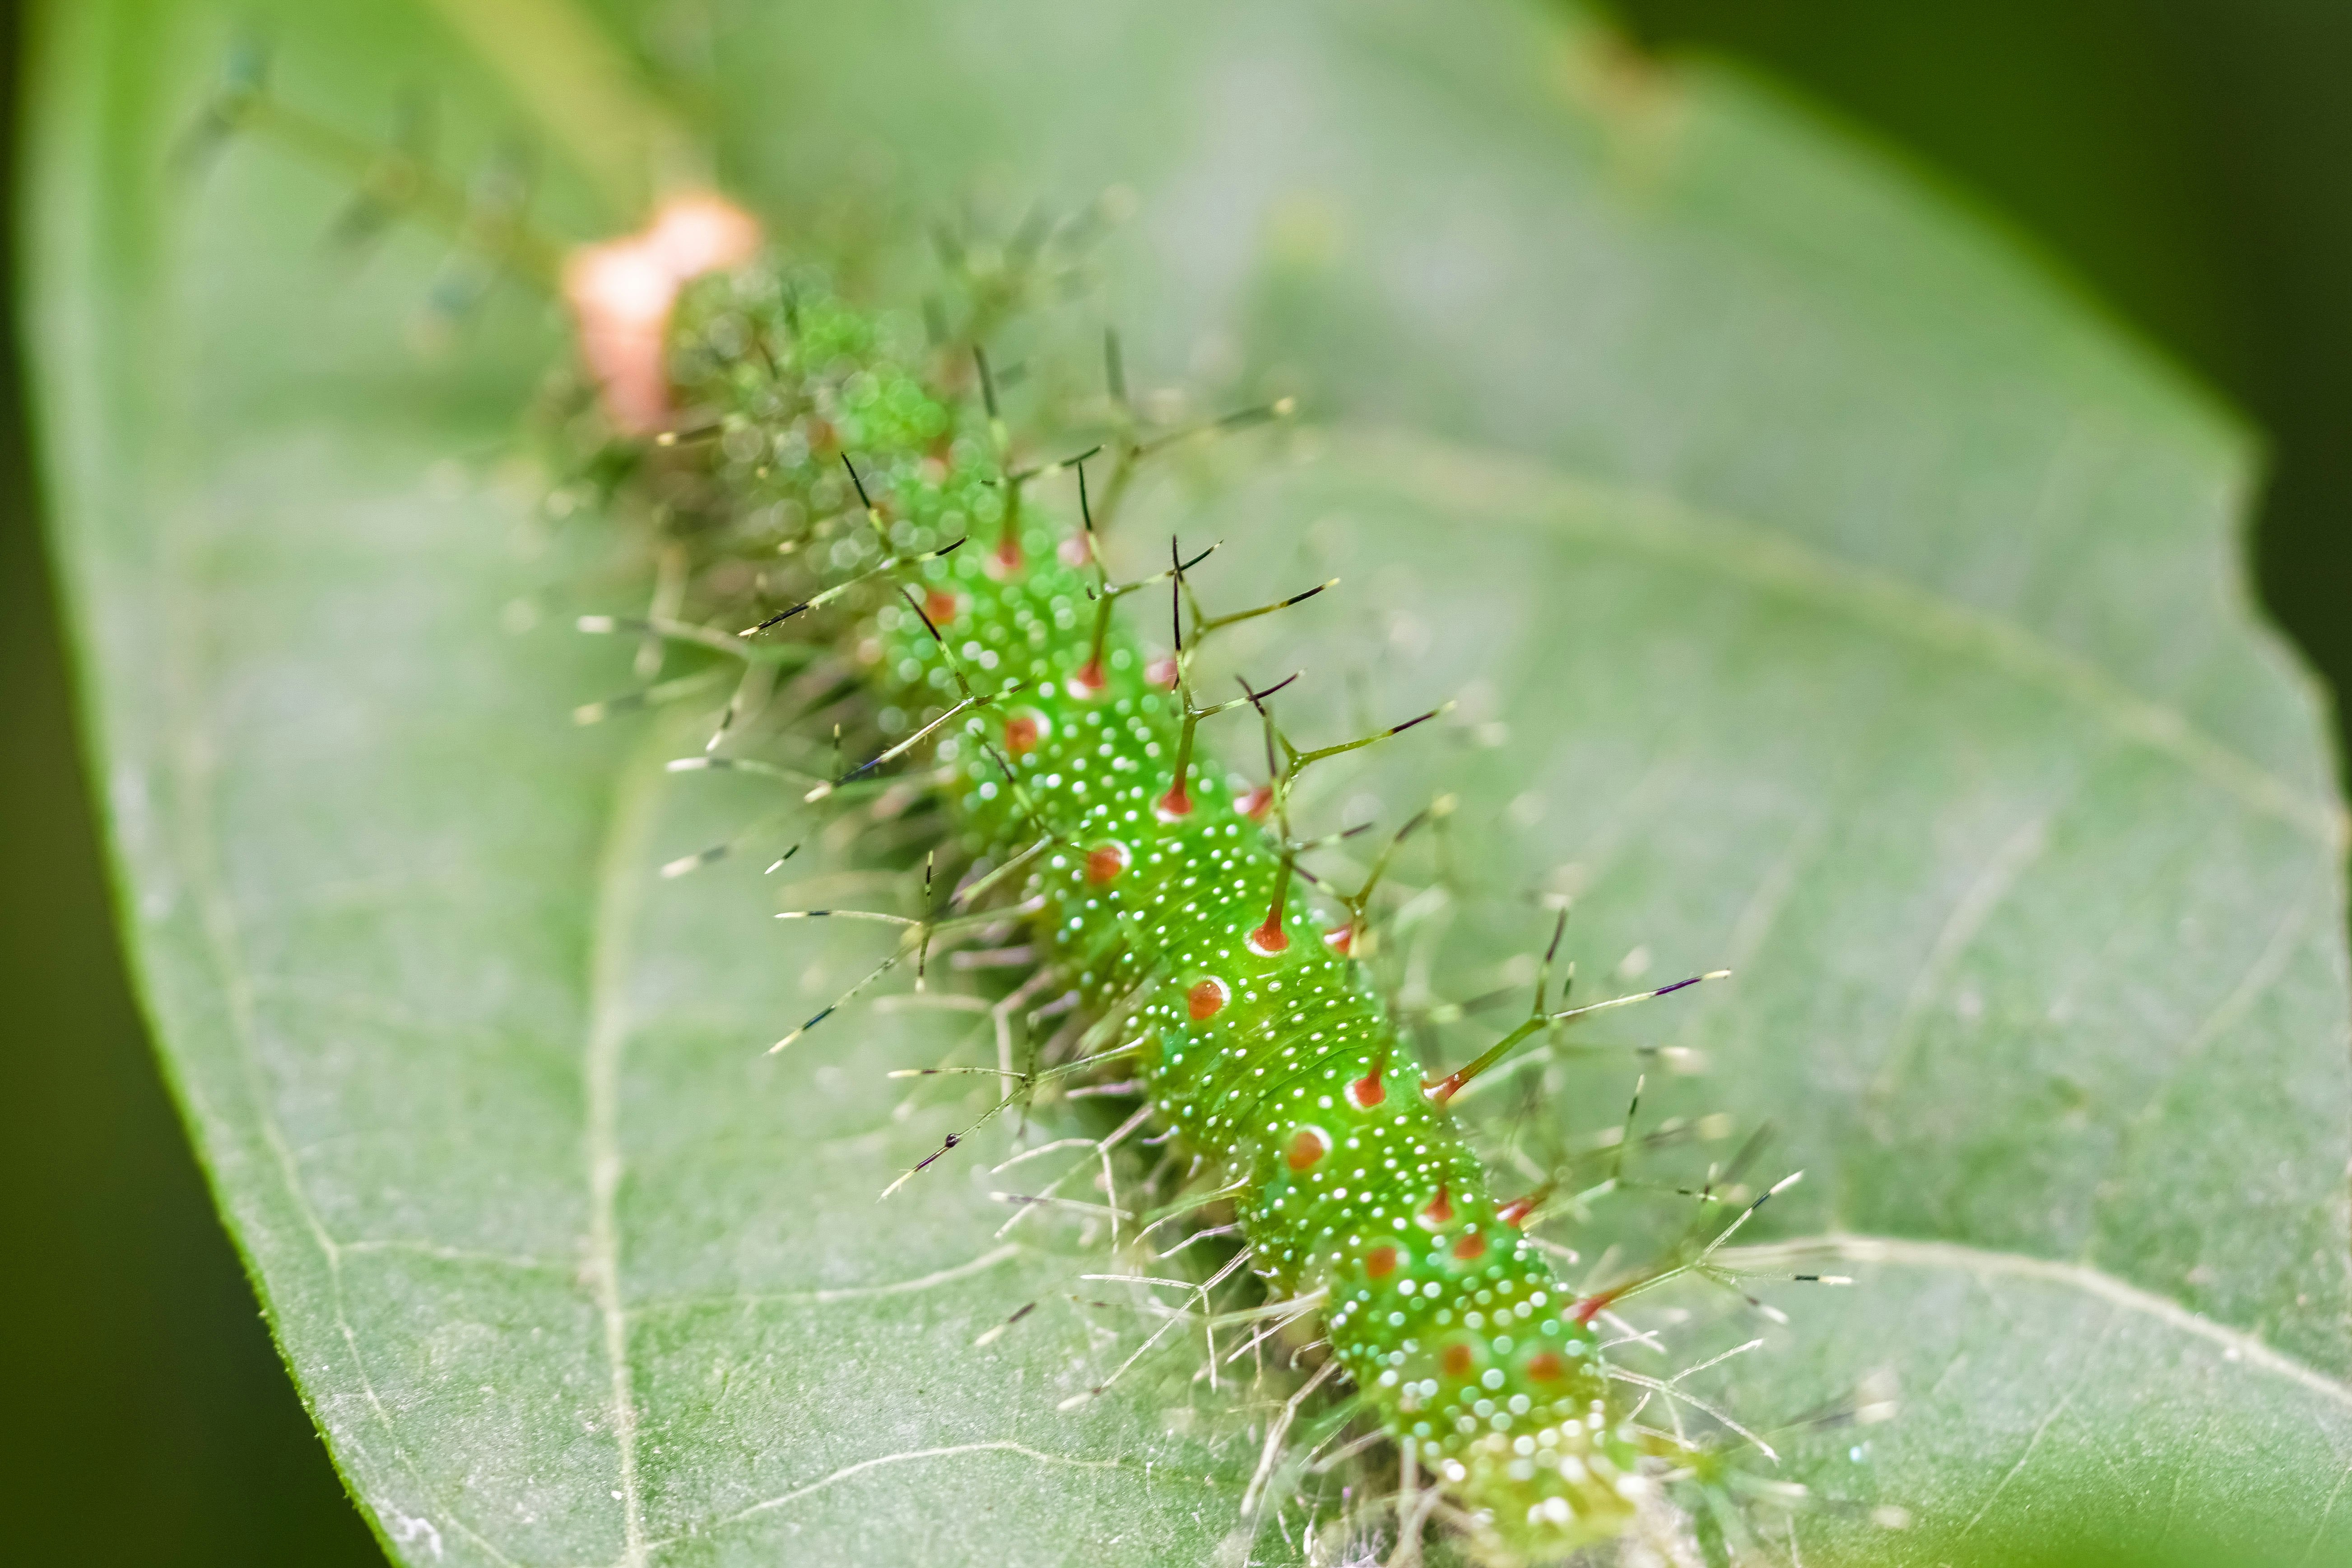 green and brown caterpillar on green leaf